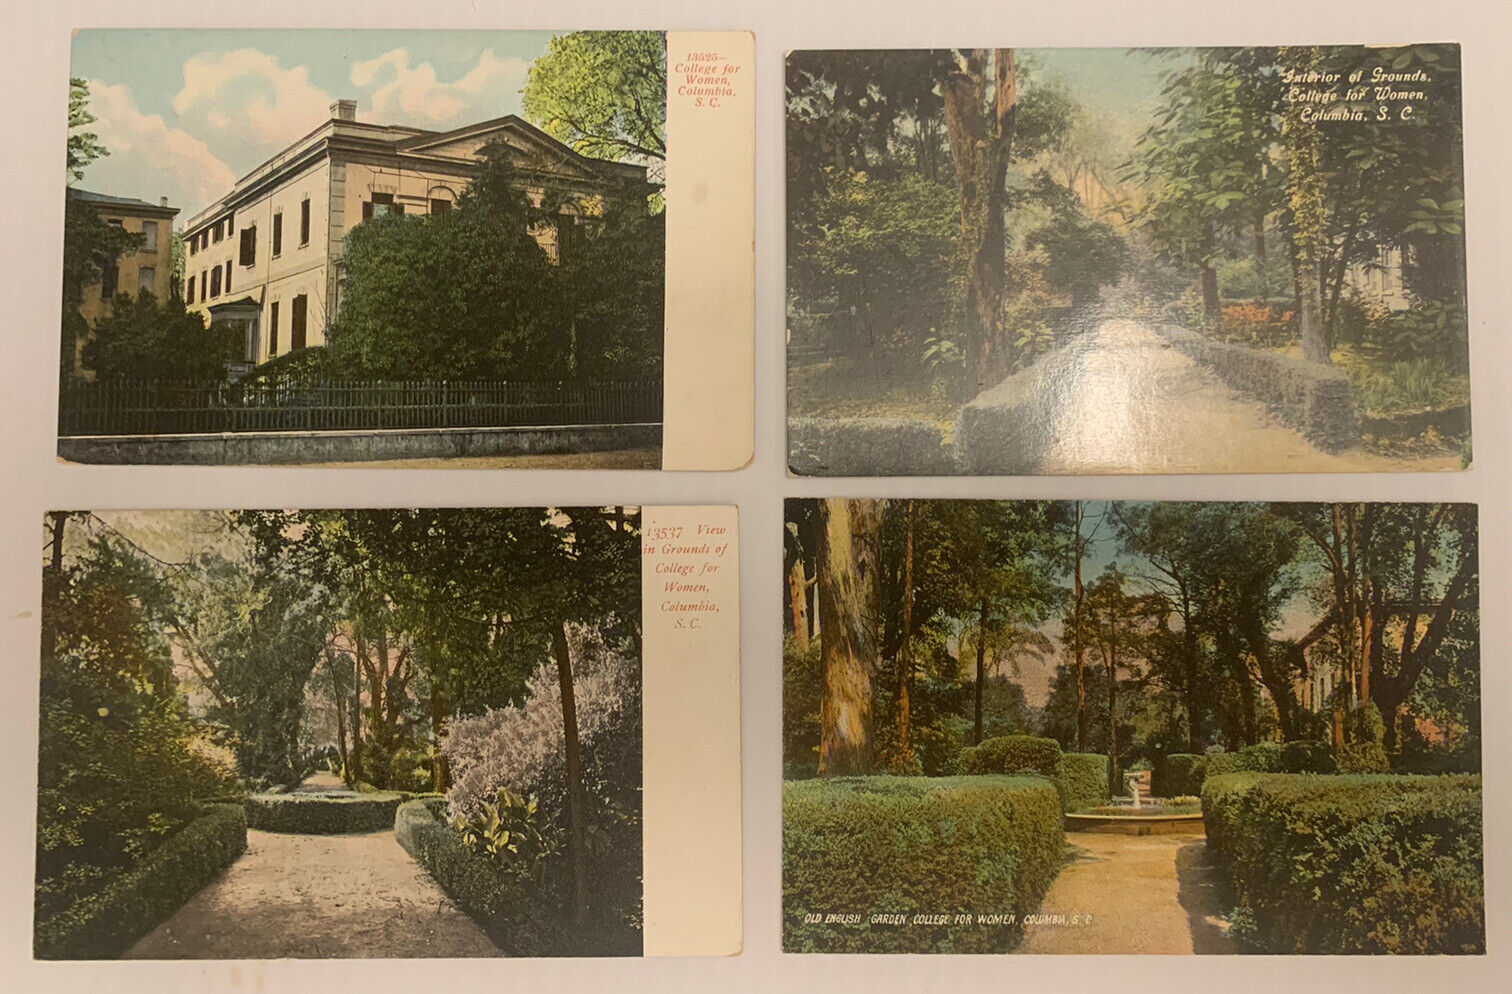 SC~SOUTH CAROLINA~COLUMBIA~LOT OF 4~COLLEGE FOR WOMEN~CAMPUS GROUNDS~C.1910